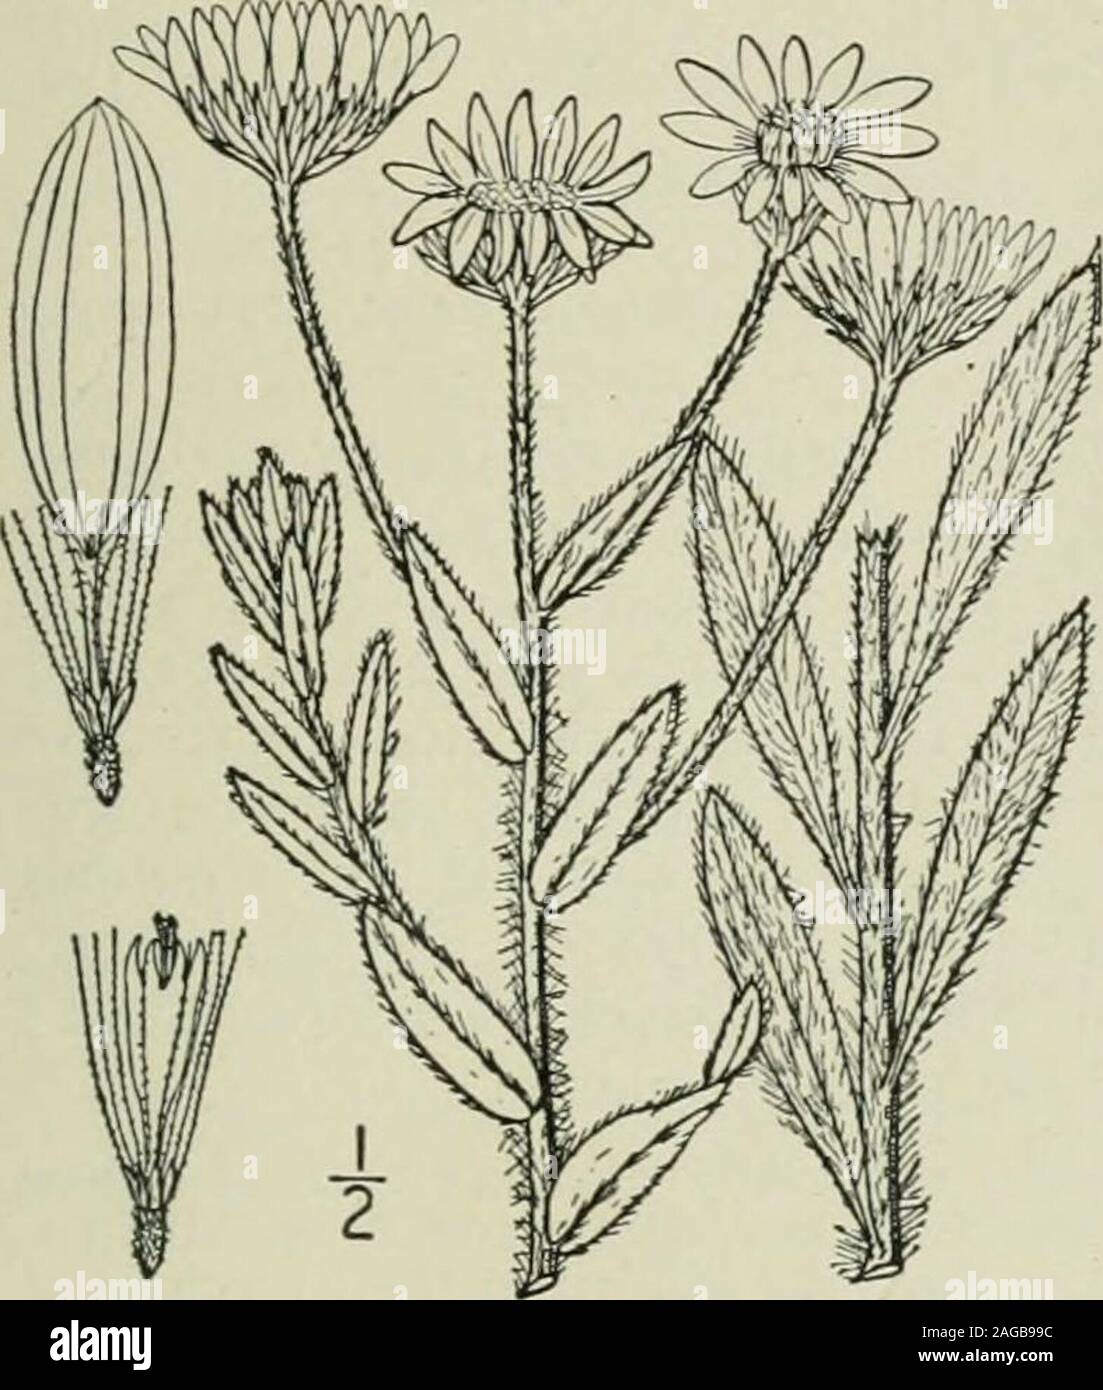 . An illustrated flora of the northern United States, Canada and the British possessions : from Newfoundland to the parallel of the southern boundary of Virginia and from the Atlantic Ocean westward to the 102nd meridian. 5. Chrysopsis stenophylla (A. Gray) Greene. Stiff-leaved Golden Aster. Fig. 4200. Chrysopsis villosa var. stenophylla A. Gray, Syn. Fl. i: Part 2, 123. 1884.C. stenophylla Greene. Erythea 2 : 96. 1894.C. angustifolia Rydb. Bull. Torr. Club 37: 128. 1910. Low. slender, hirsute or rough-pubescent,6-io high. Leaves linear or slightly broad-ened above, densely canescent and cilia Stock Photo